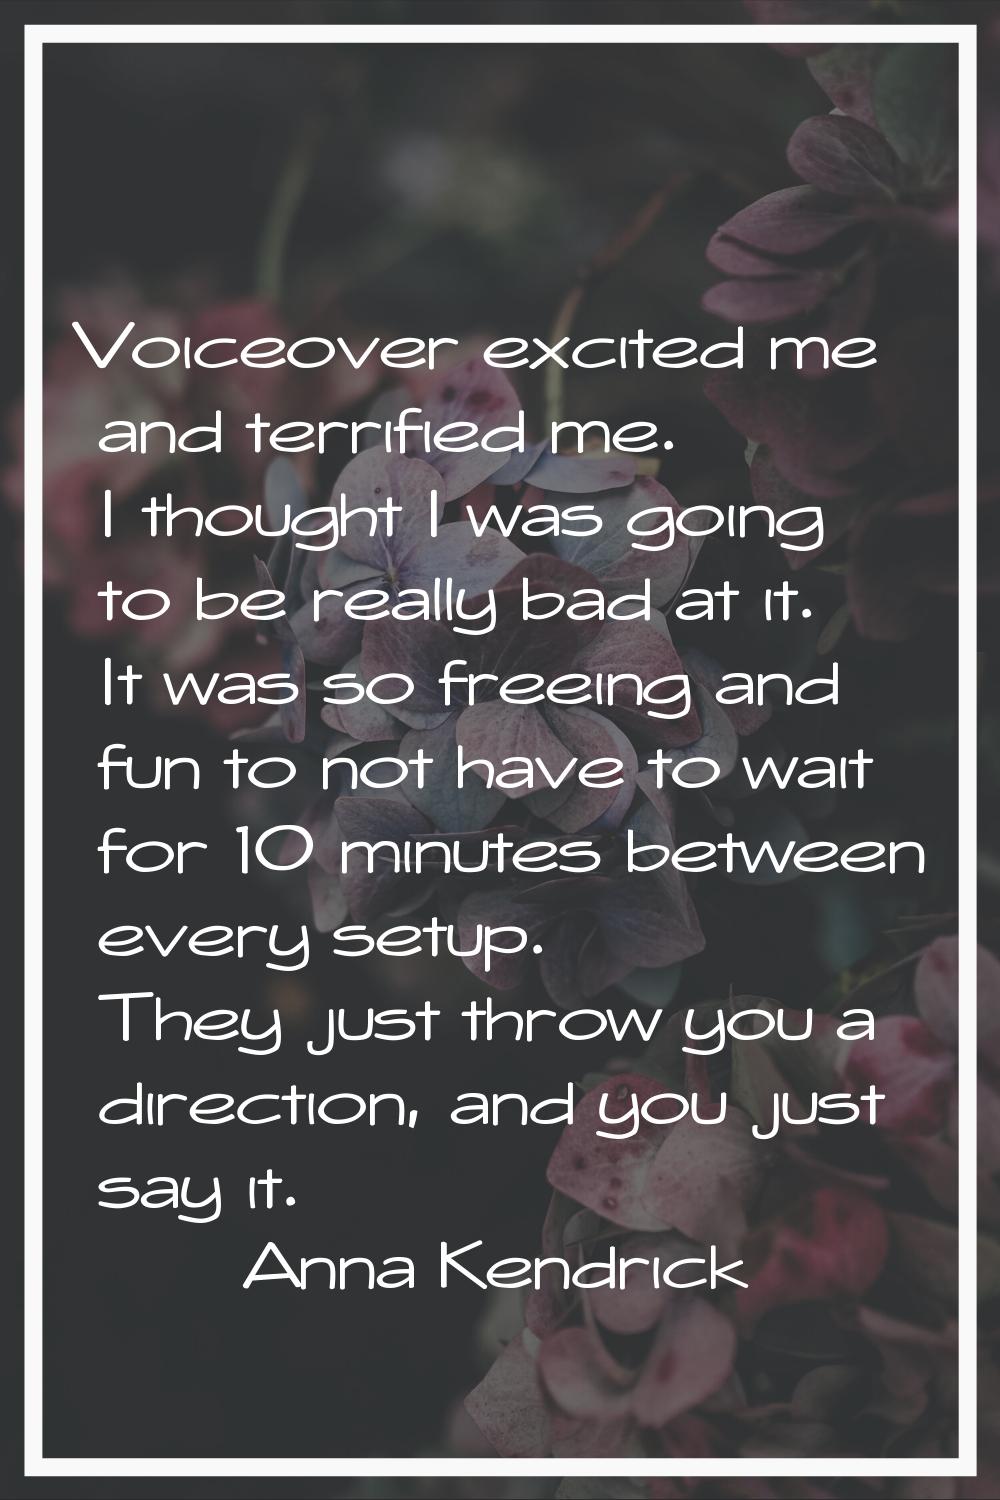 Voiceover excited me and terrified me. I thought I was going to be really bad at it. It was so free